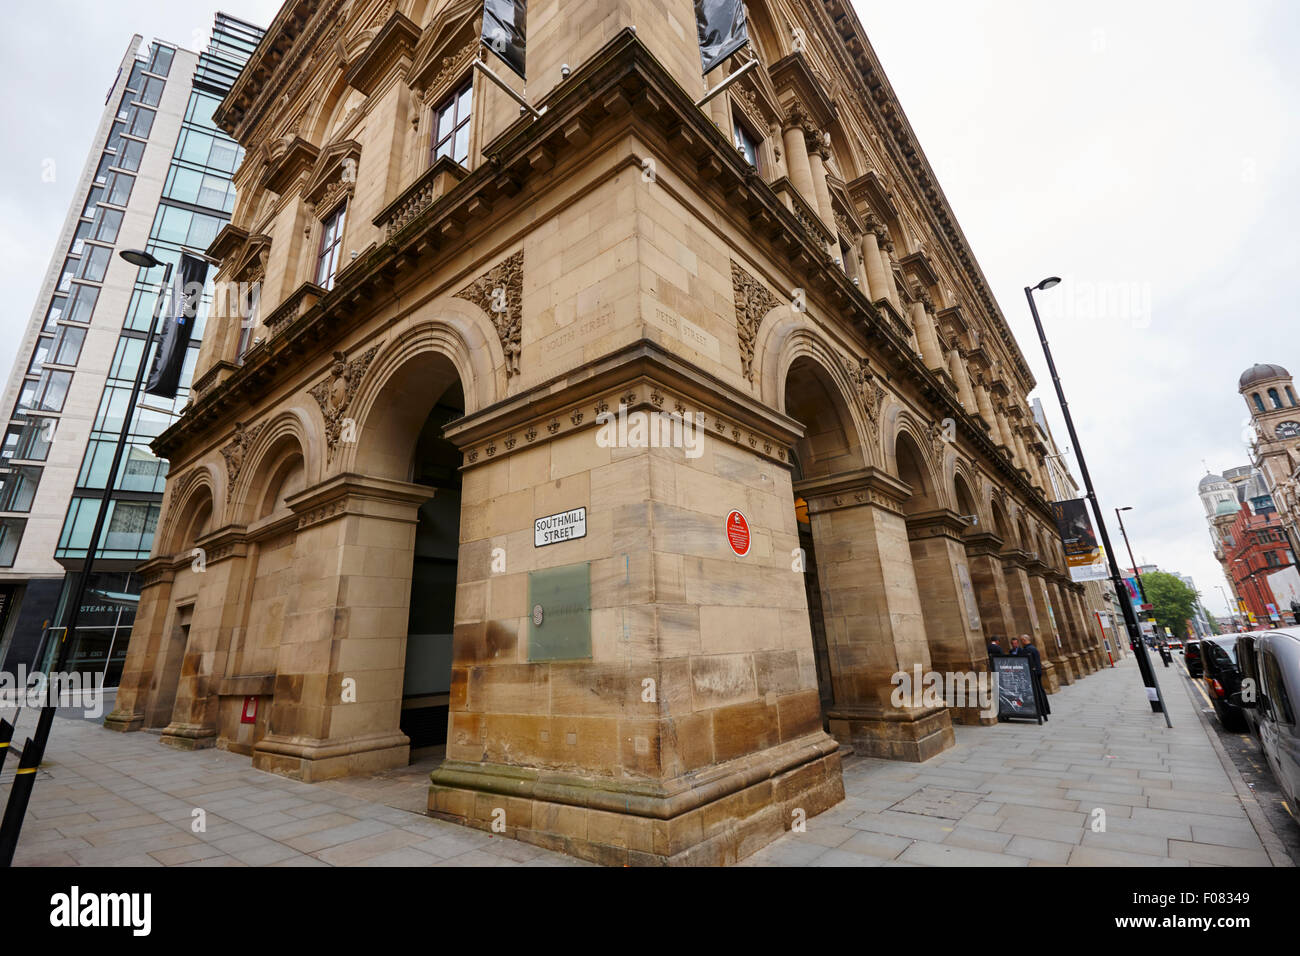 corner of southmill street and peter street Free Trade Hall on St Peters site of the Peterloo massacre Manchester England UK Stock Photo